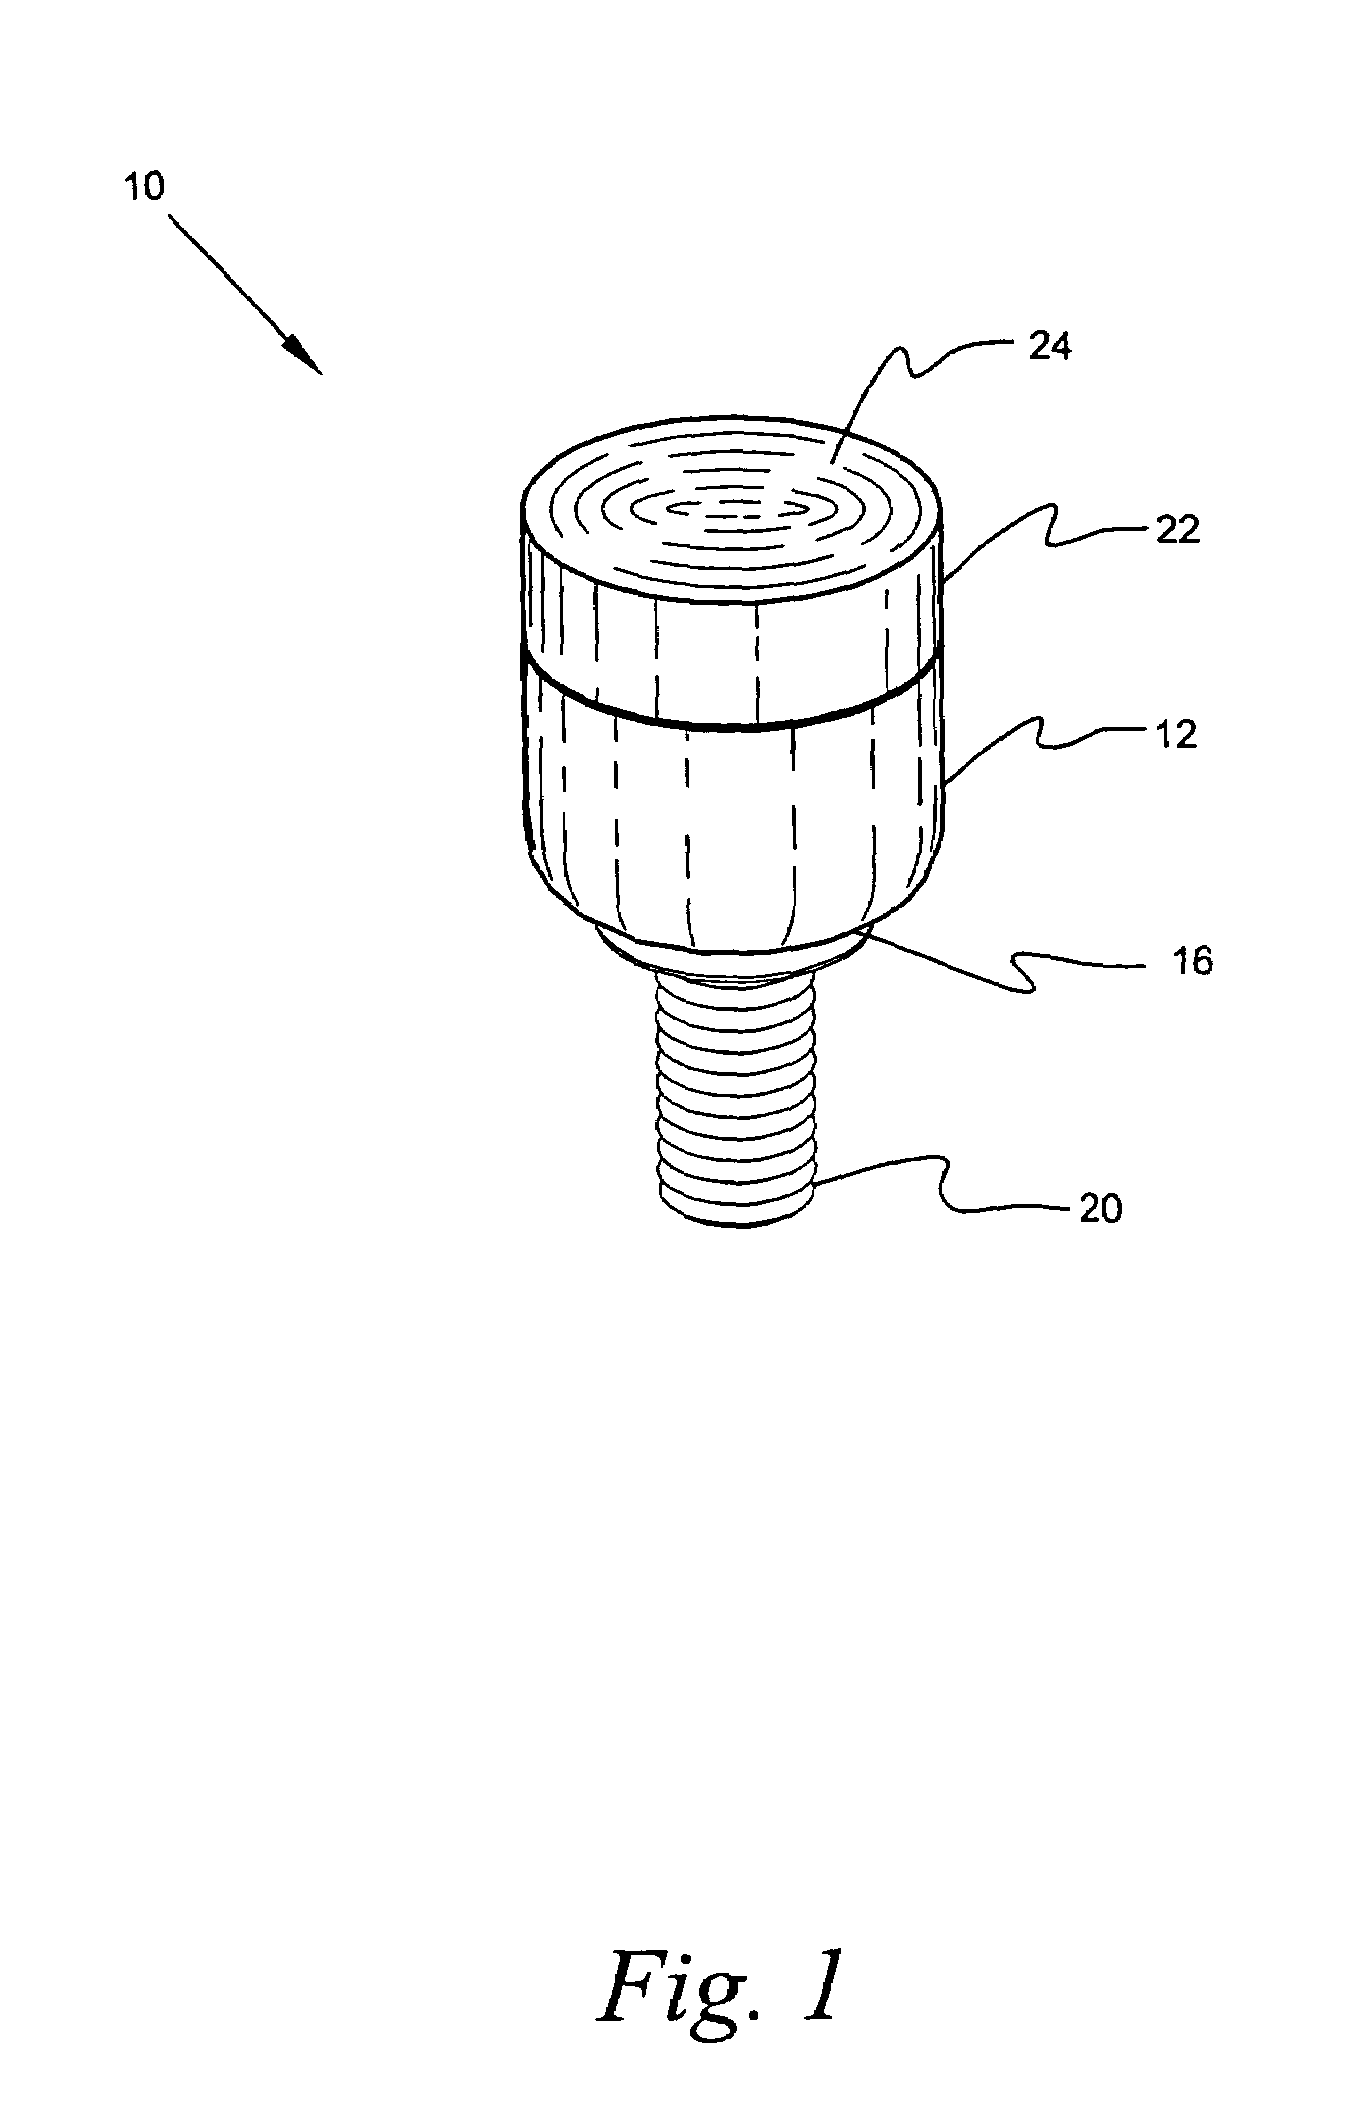 Impact driver and fastener removal device